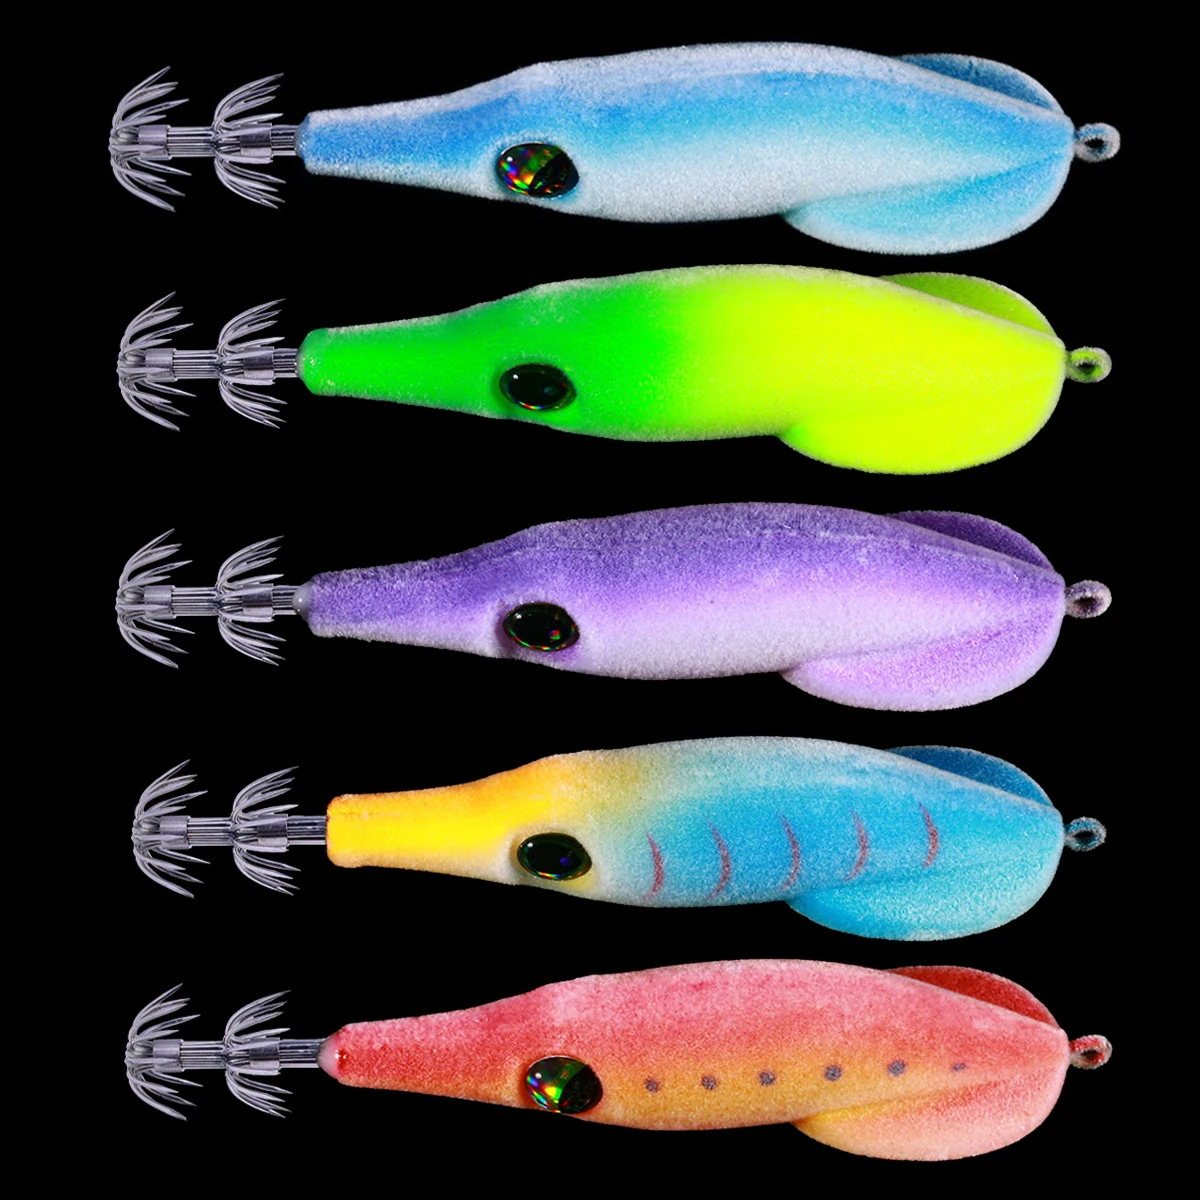 

Octopus Squid Floating Fishing Lures 9.5cm 6g Wood Shrimp Lures Cuttlefish Jigging Squid Hook Artificial Bait For Sea Fishing